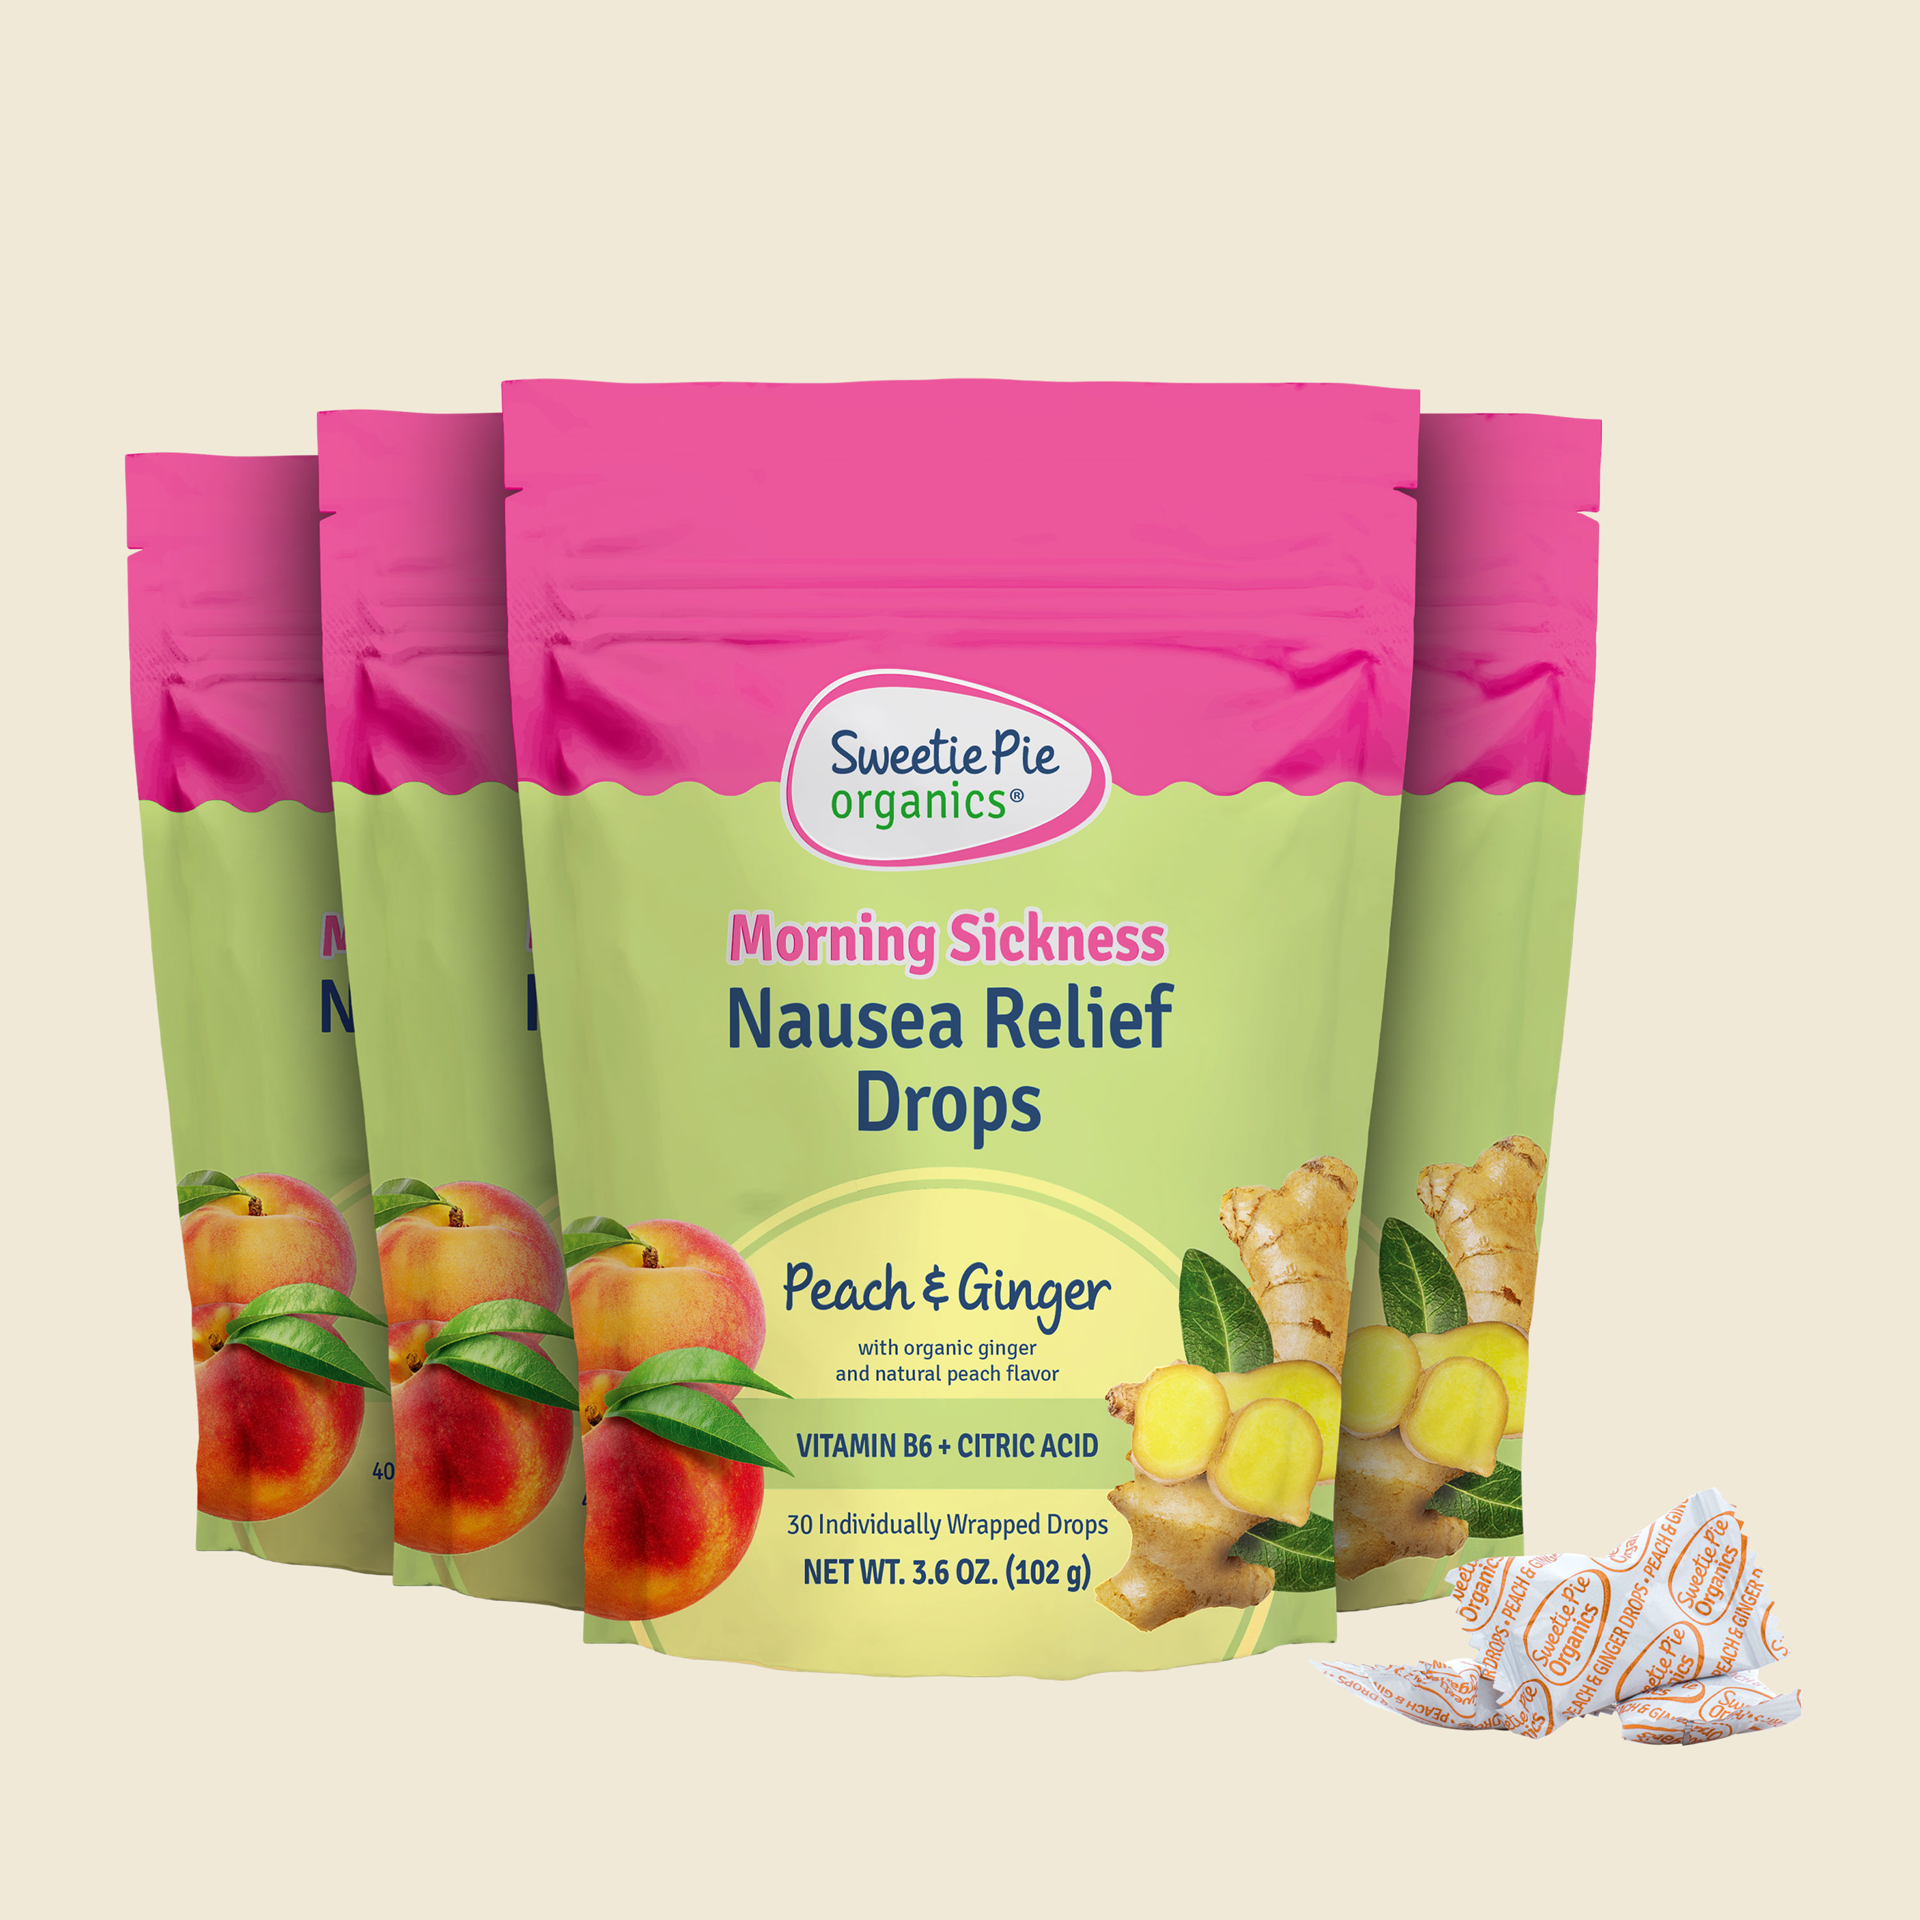 Group of bags of Sweetie Pie's peach & ginger flavored nausea relief drops, with wrapped drop